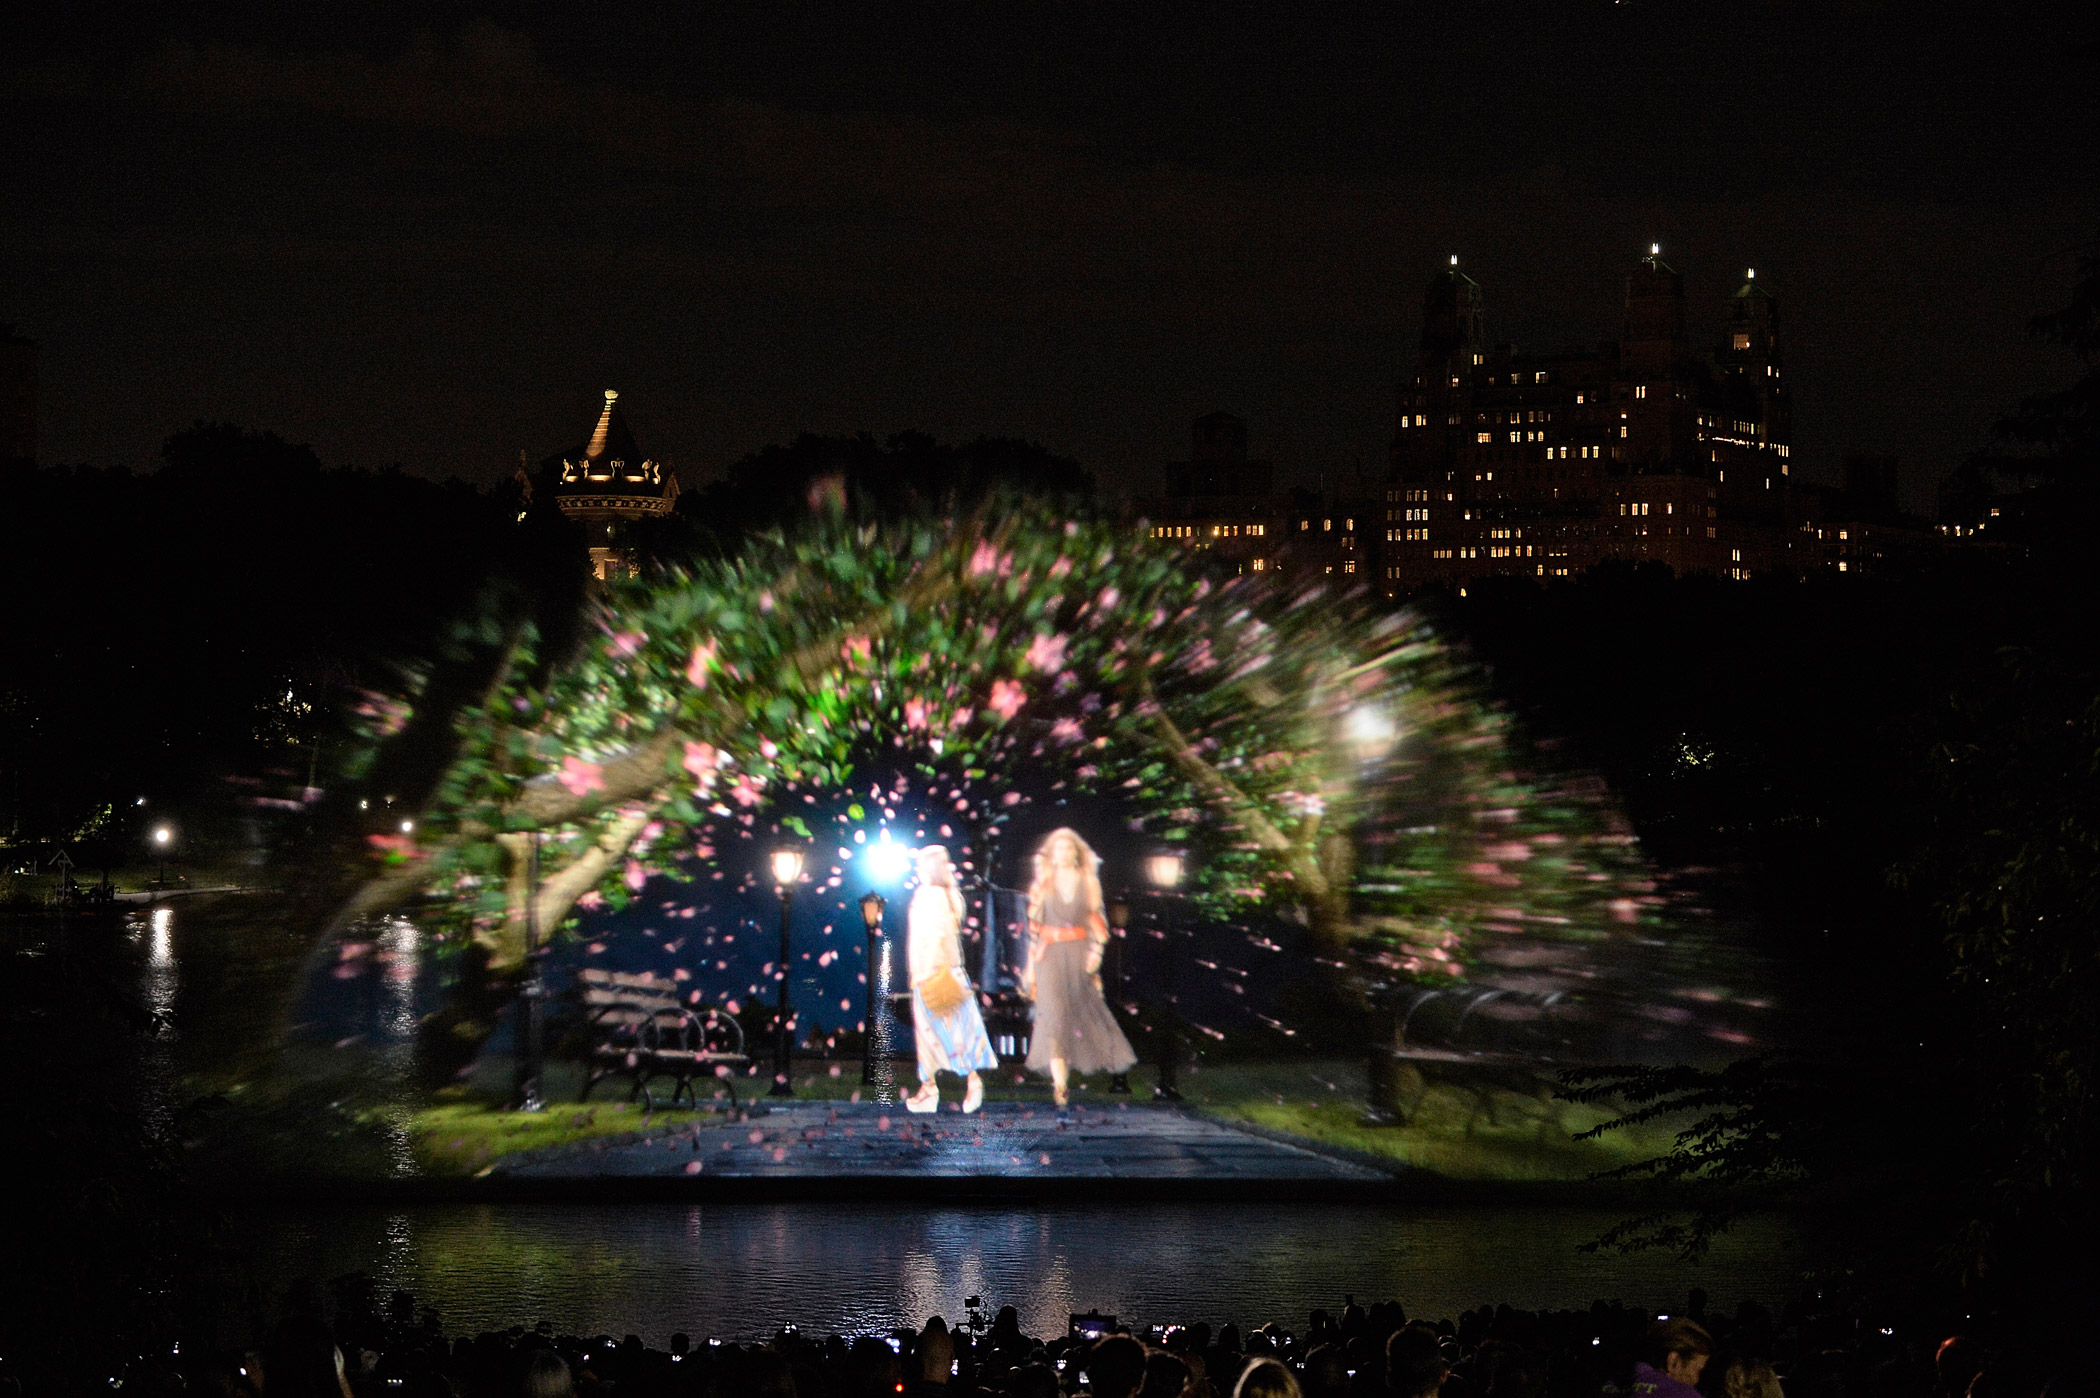 A projection on water at the Polo Ralph Lauren Spring Summer 2015 fashion show during New York Fashion Week on Sept. 8, 2014 in New York City.